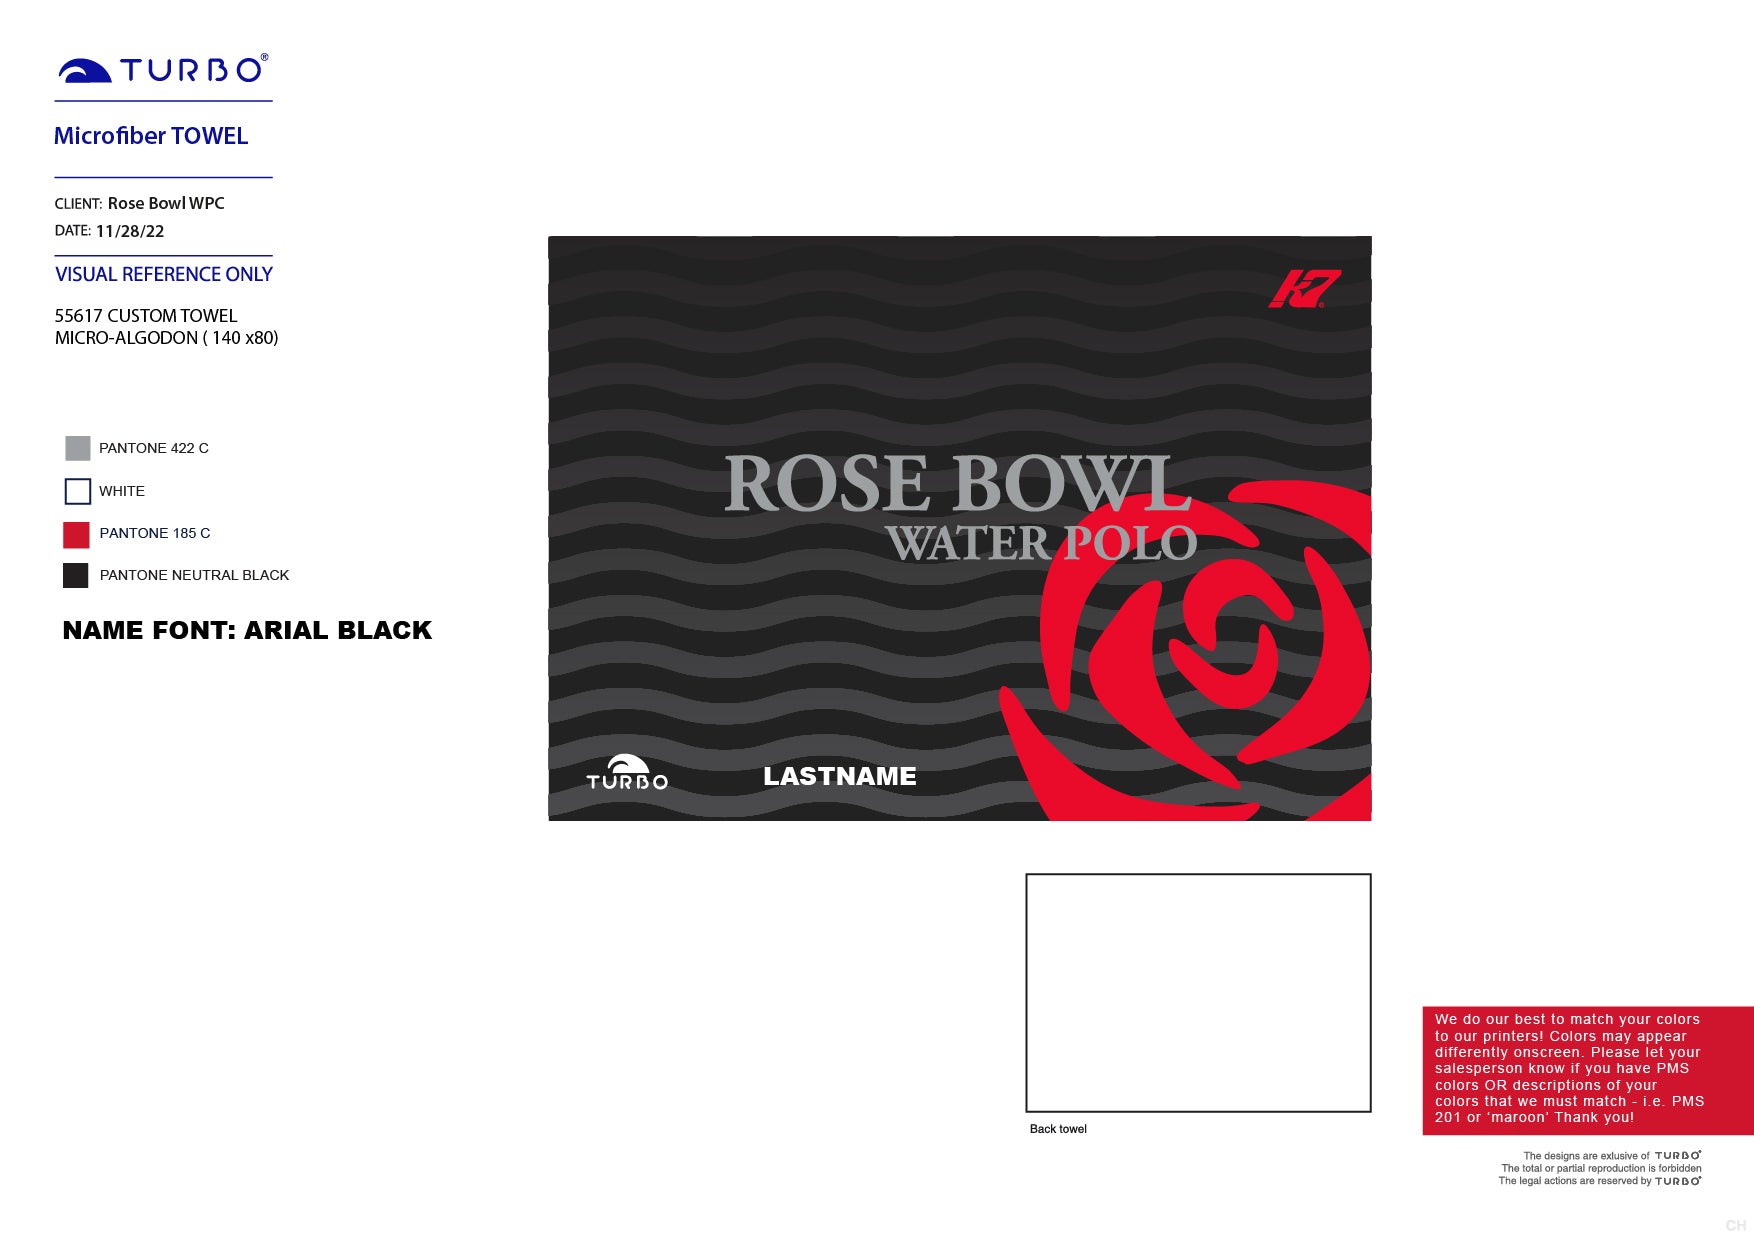 Rose Bowl Water Polo Club - Team Store